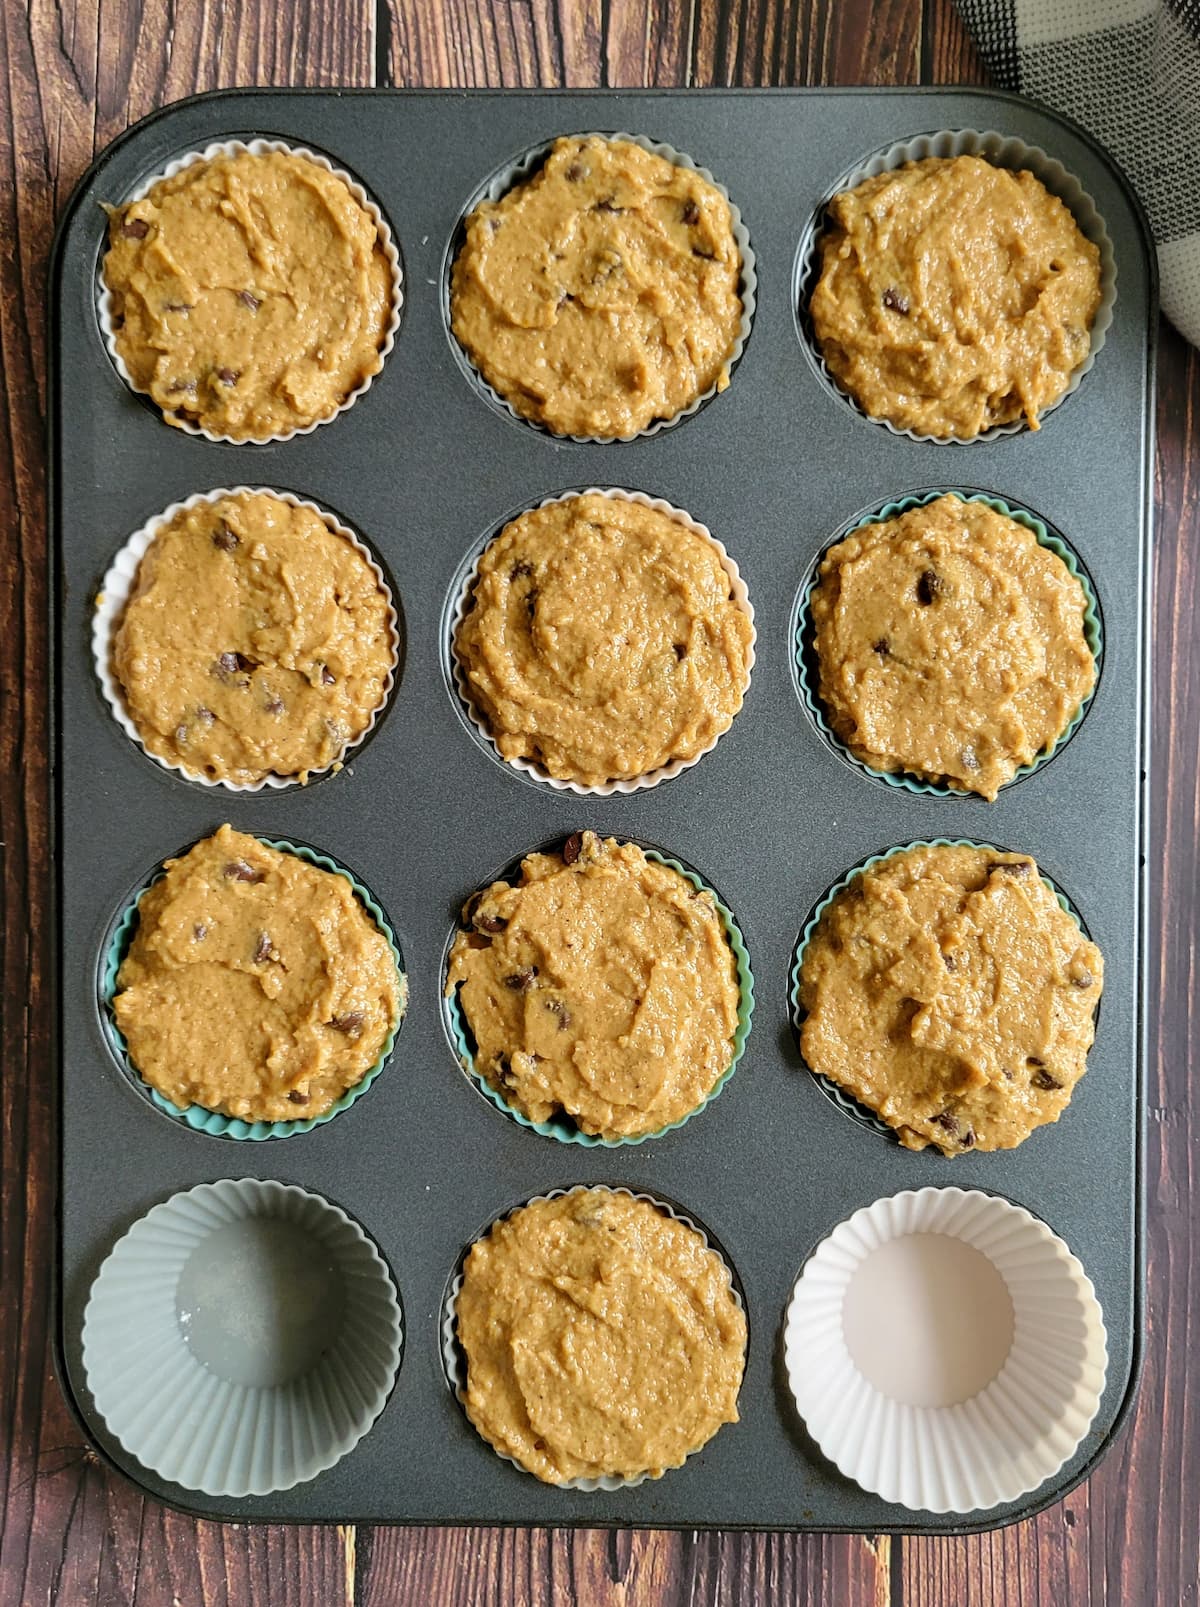 10 unbaked muffins in a muffin tin